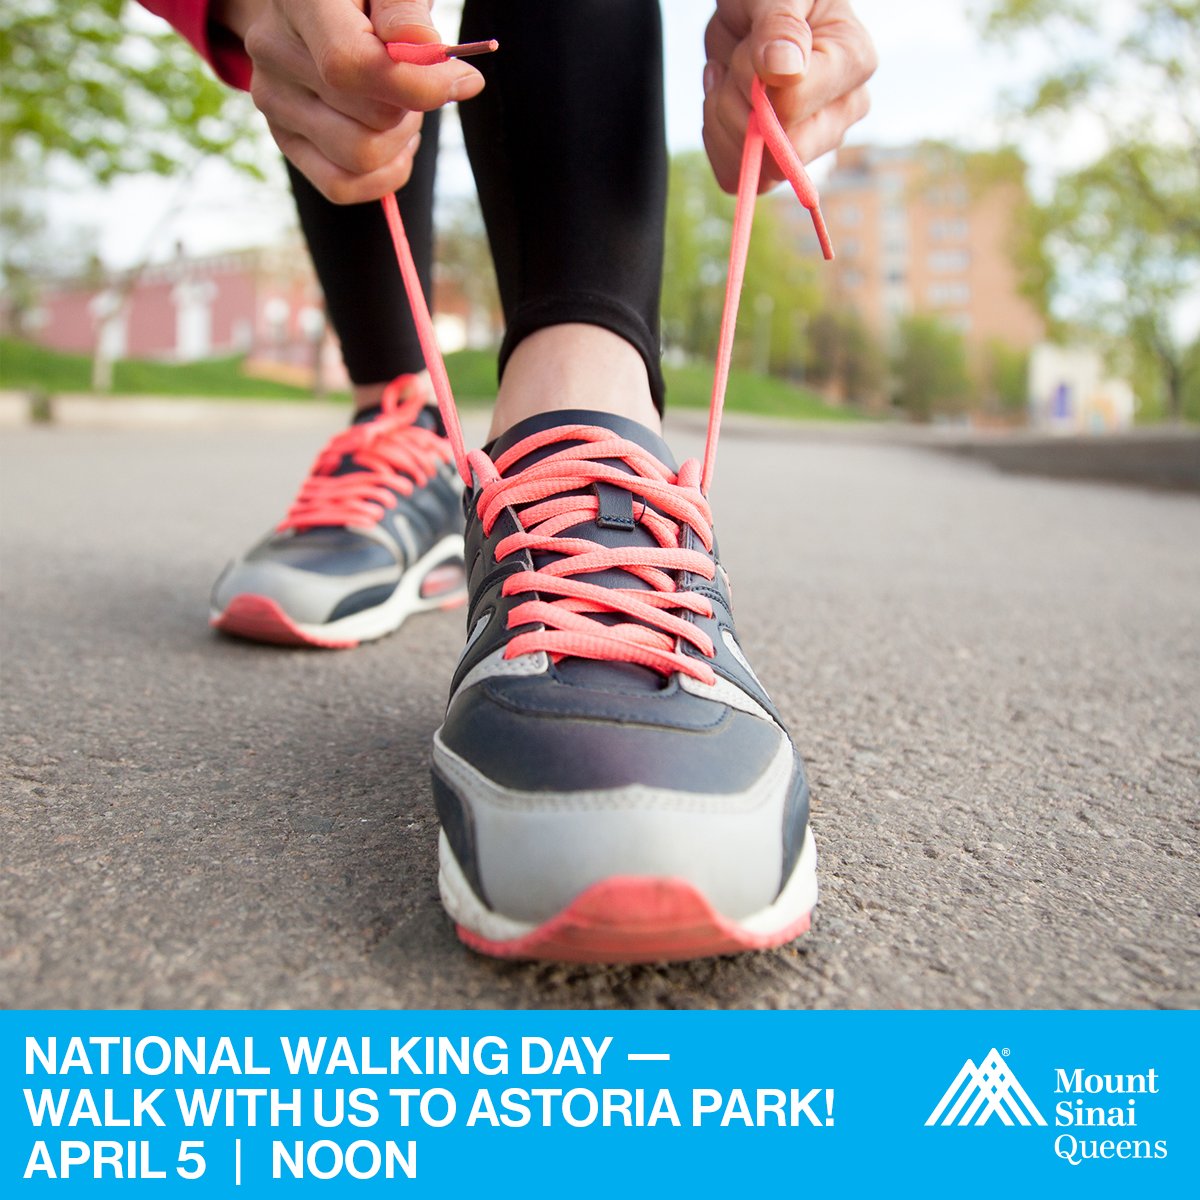 #QNS It’s #NationalWalkingDay. Take a brisk walk with our staff today at noon. Bring your sneakers and meet us at the Hospital entrance, 25-10 30th Avenue – please be on time. We plan to return to Mount Sinai Queens by 1 pm. bit.ly/3lGdDbo